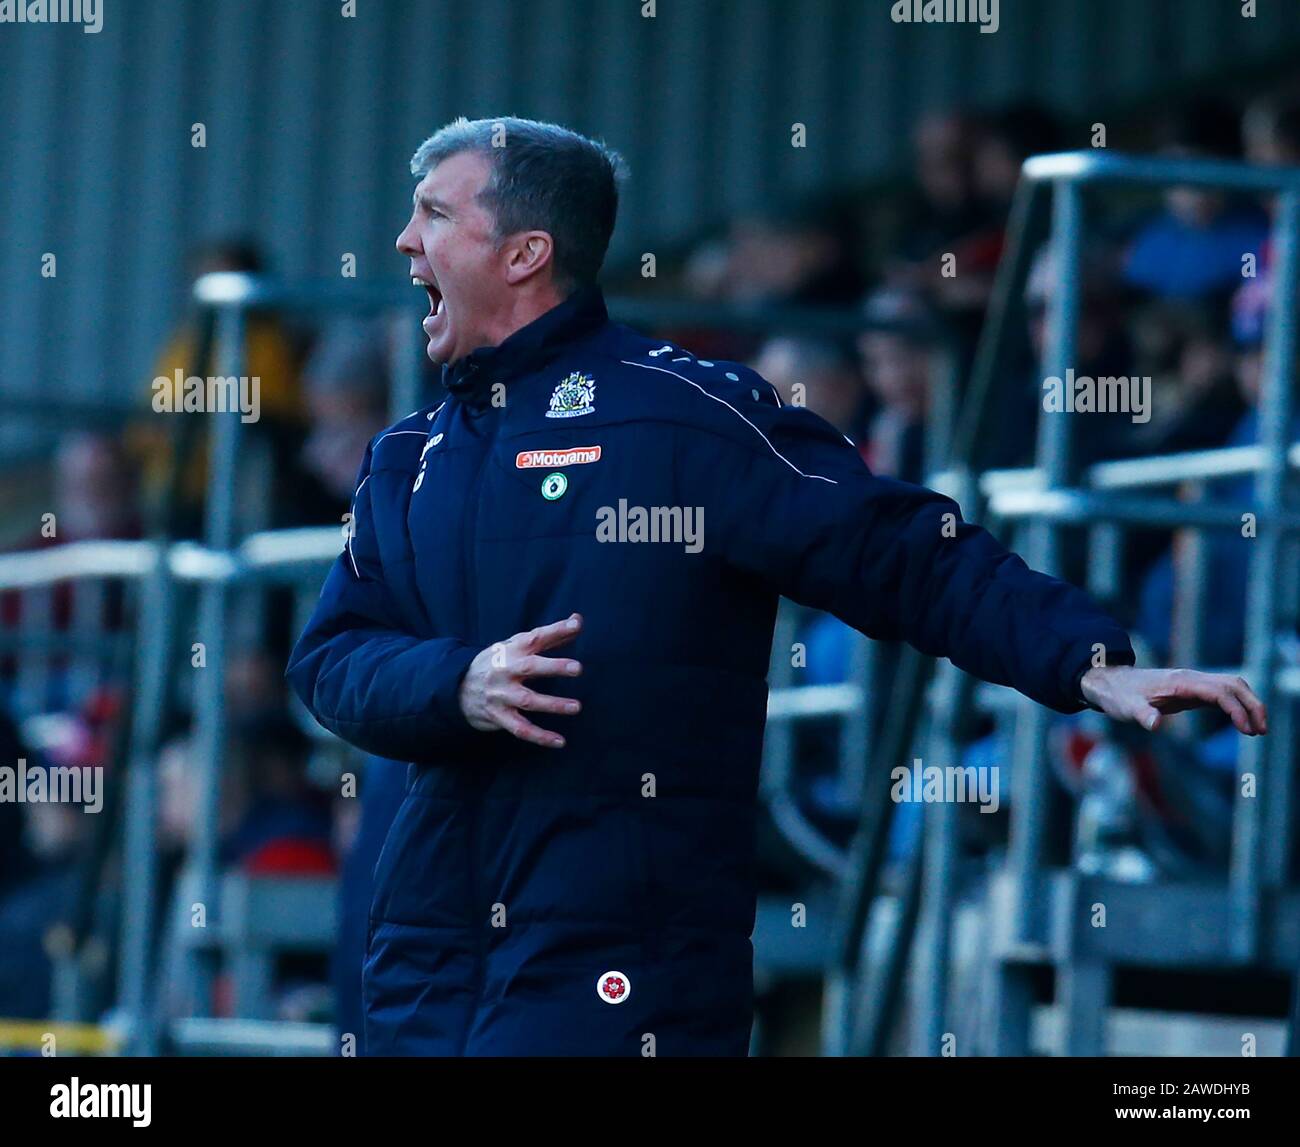 London, UK. 08th Feb, 2020. DAGENHAM, ENGLAND. FEBRUARY 08: Jim Gannon manager of Stockport Countyduring National League match between Dagenham and Redbridge FC and Stockport County at The Chigwell Construction Stadium in Dagenham, England on February 08, 2020 Credit: Action Foto Sport/Alamy Live News Stock Photo